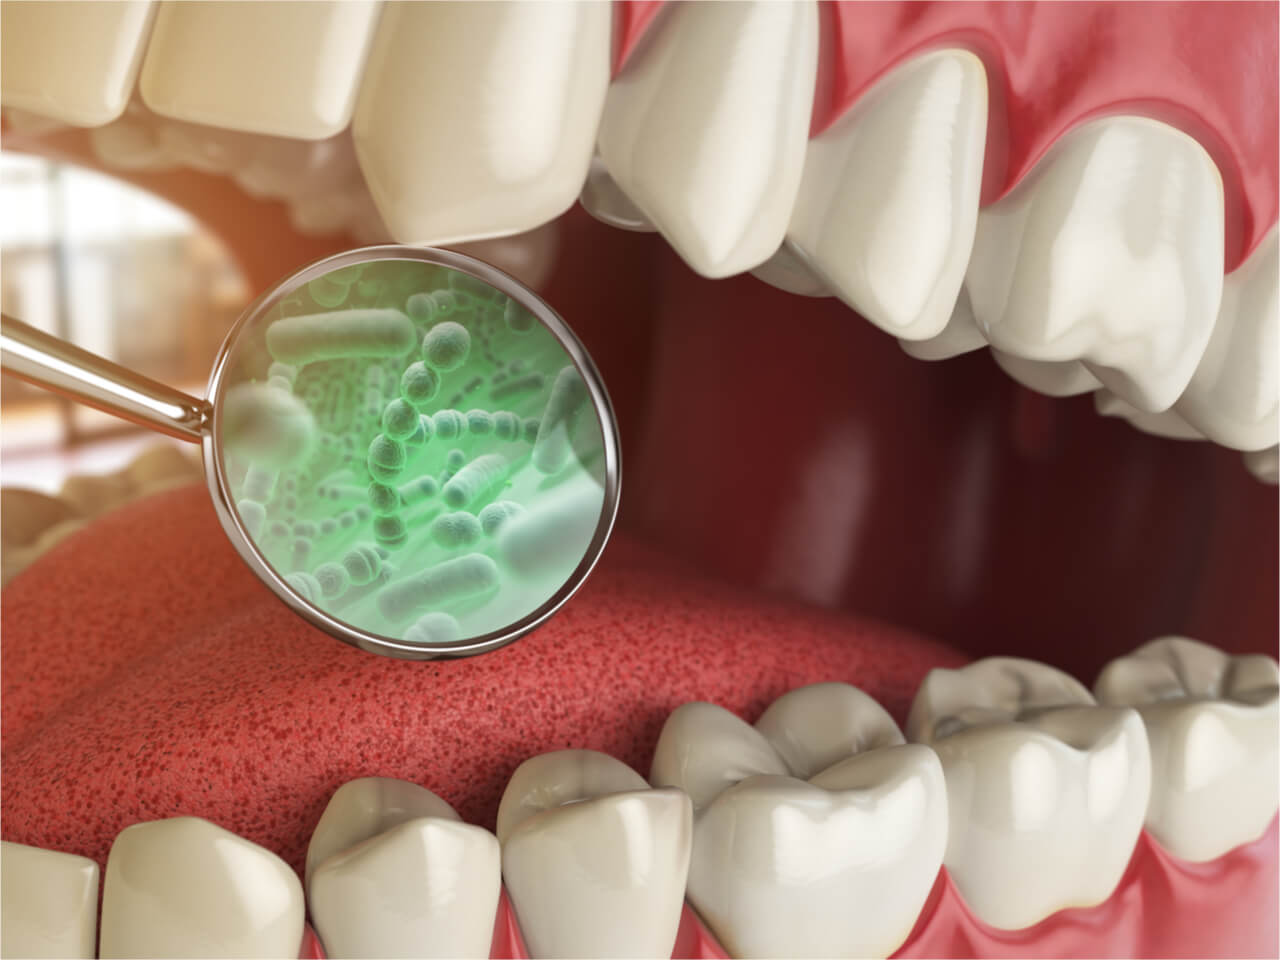 Things You Need to Know about Tooth Infection Sepsis